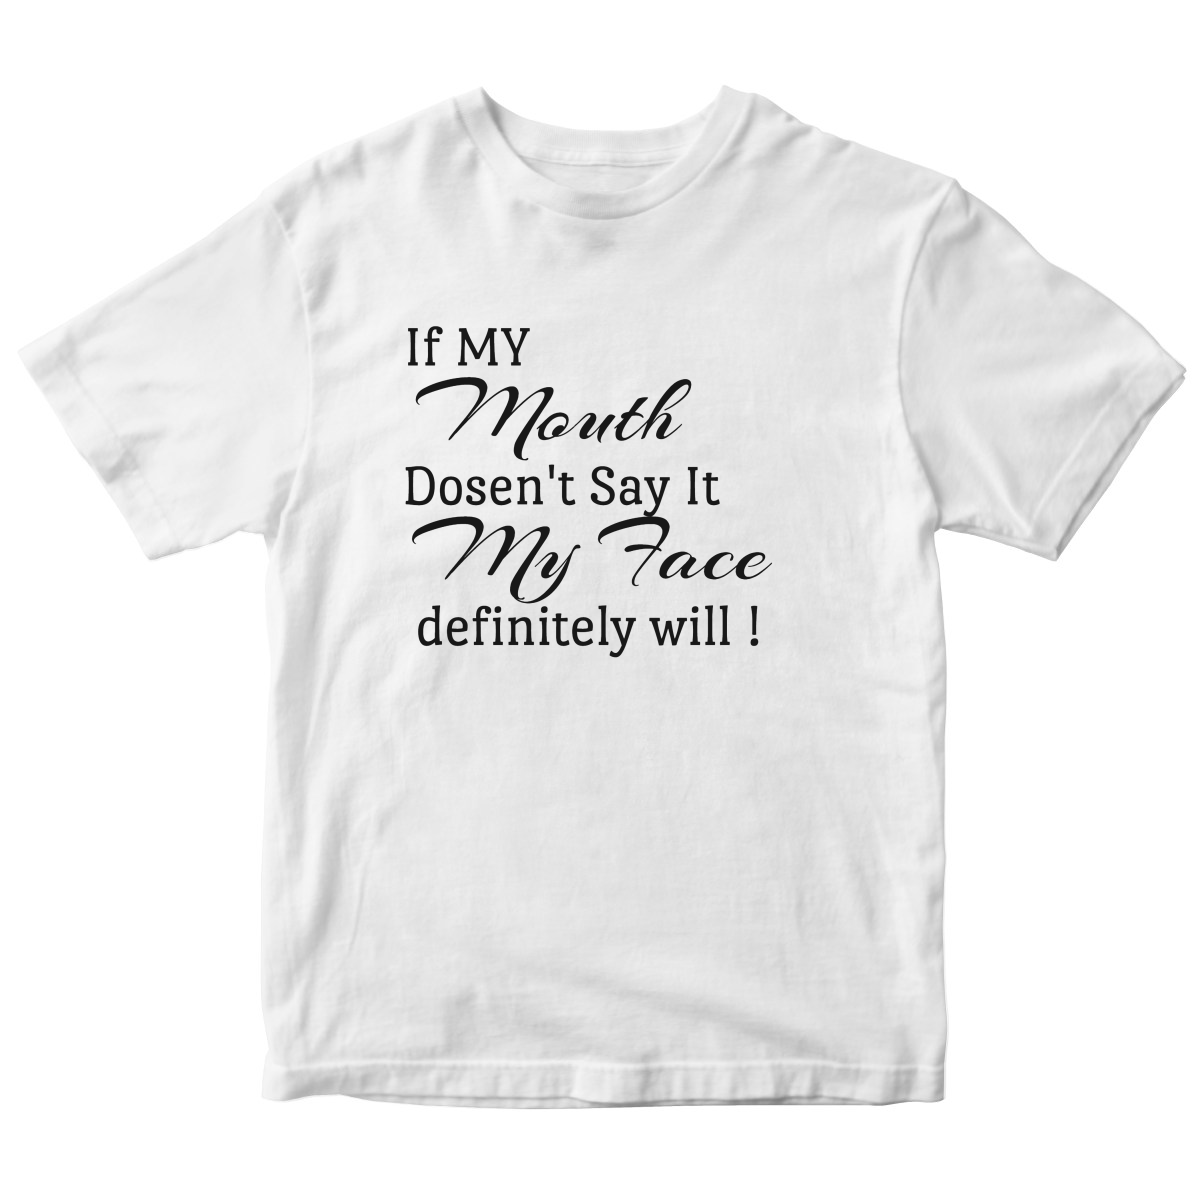 If My Mouth Doesn't Say It My Face Definitely Will  Kids T-shirt | White